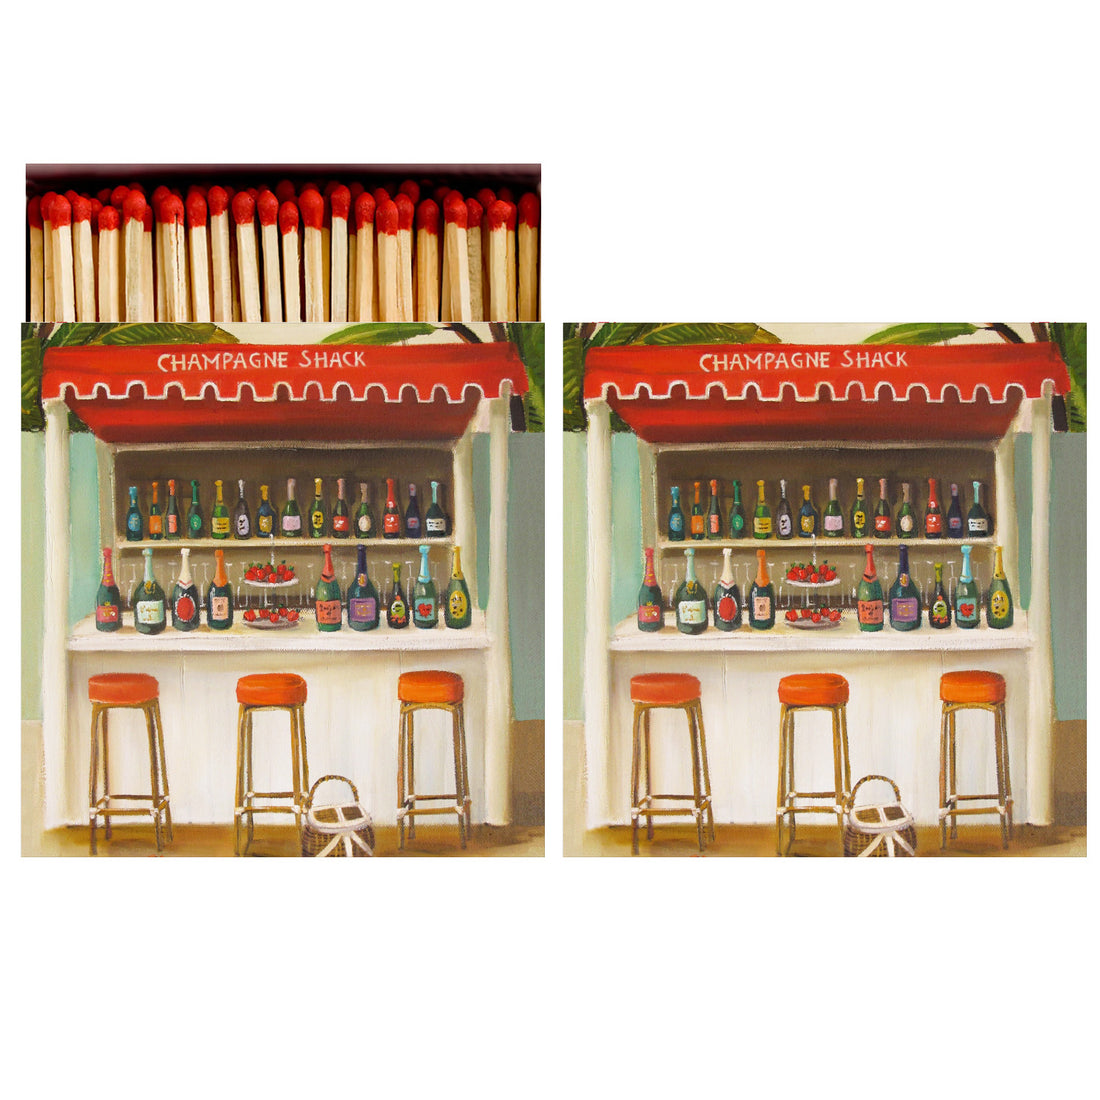 Two identical sides of a square match box, the left of which is open slightly to reveal the matches inside. The artwork on the box depicts a cozy bar setting with the sign &quot;champagne shack&quot; above a selection of bottled beverages and three bar stools.